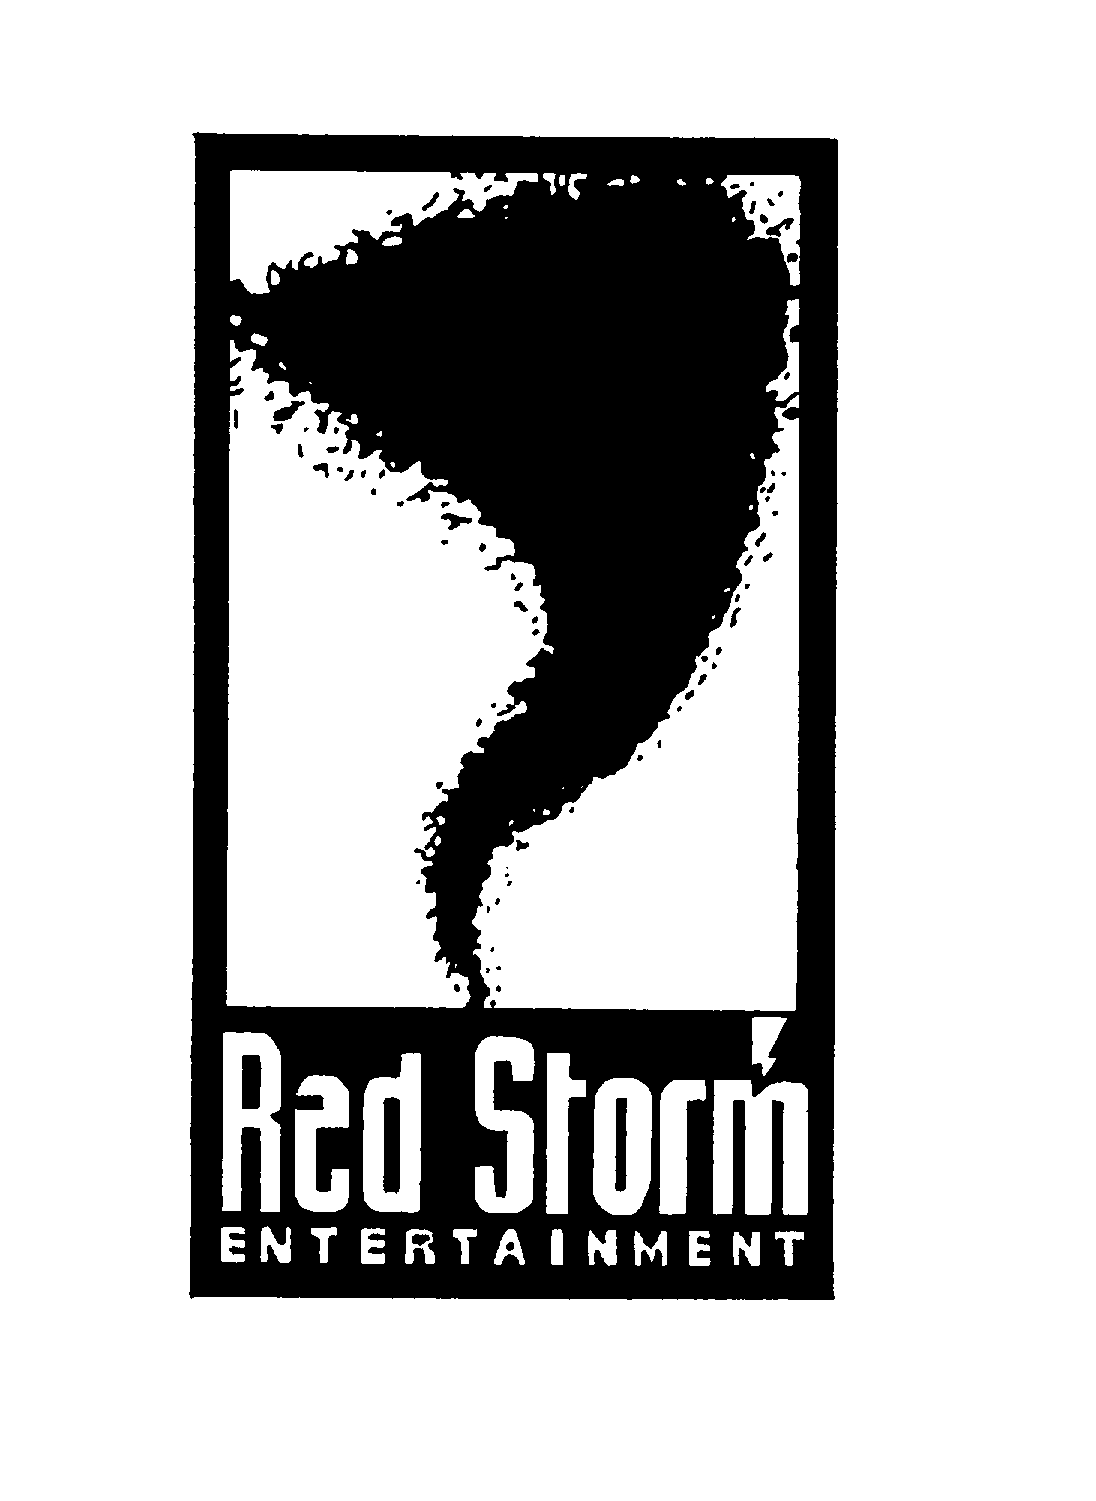  RED STORM ENTERTAINMENT